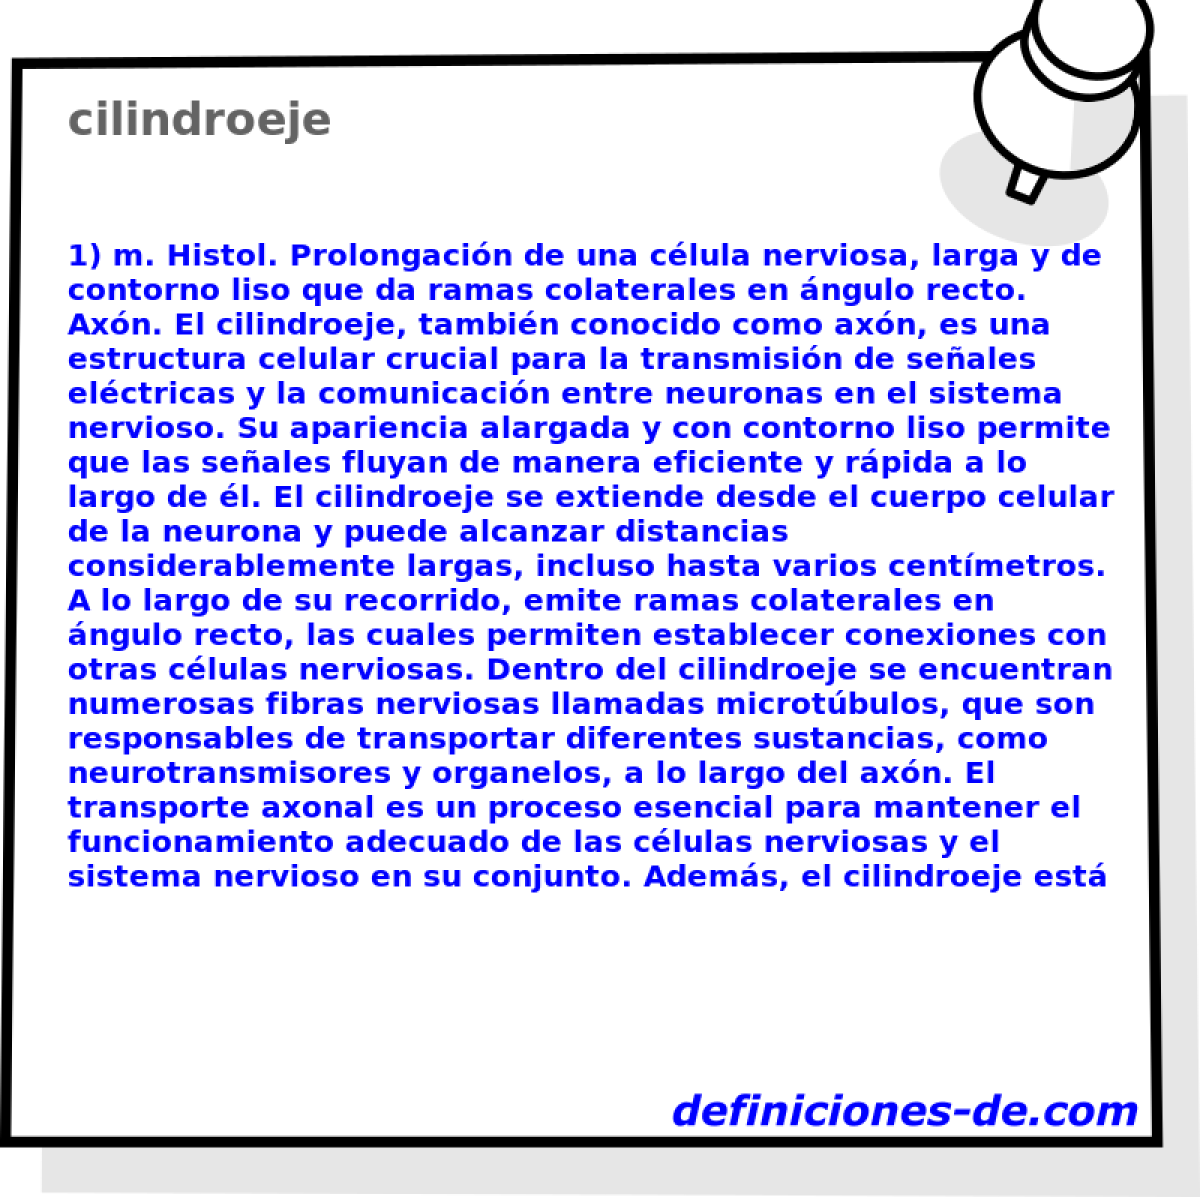 cilindroeje 